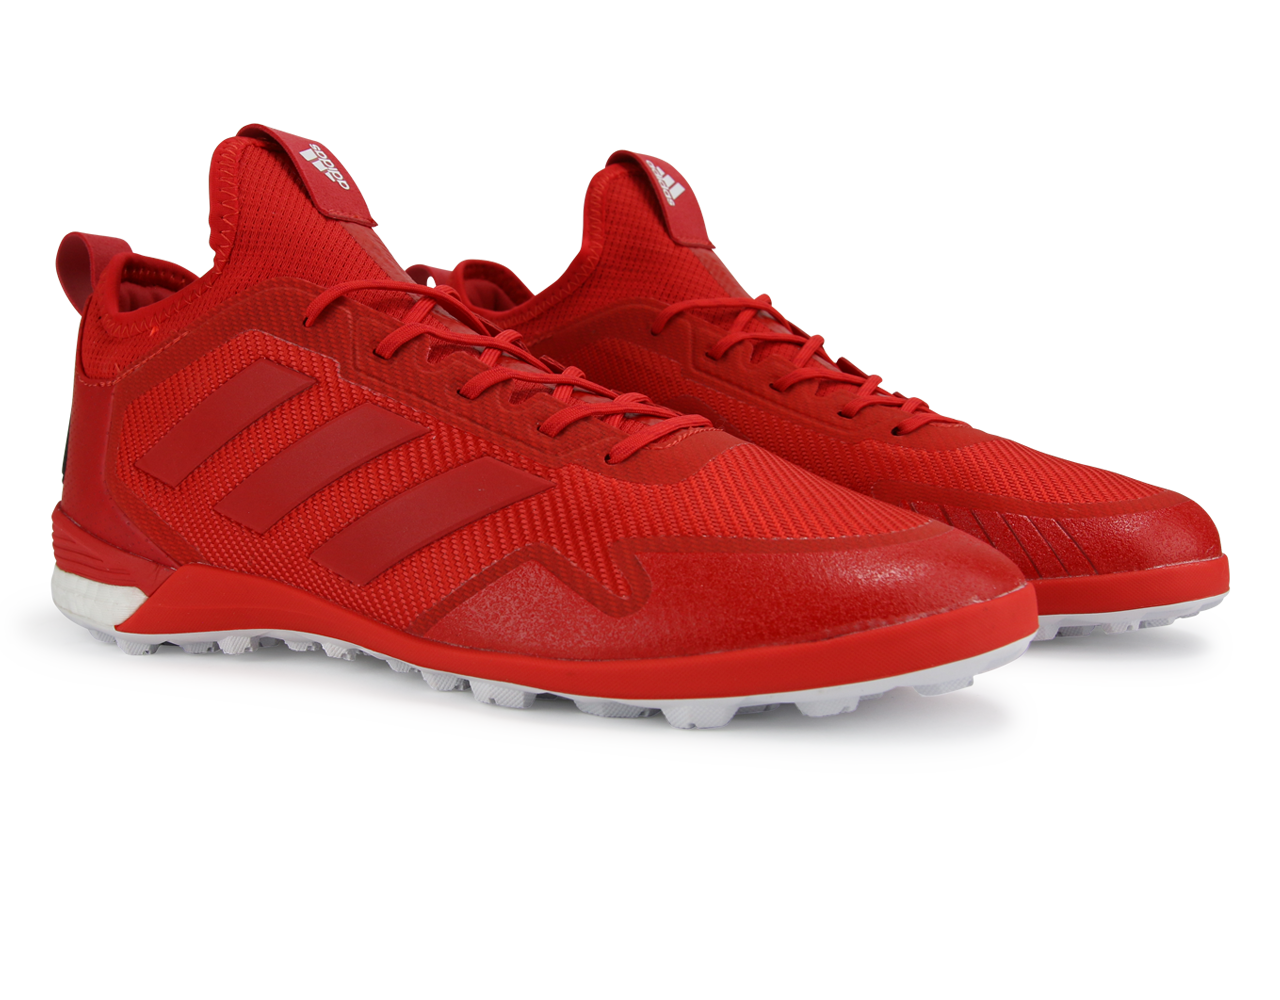 adidas Men's ACE Tango 17.1 Turf Soccer Shoes Red/Scarlet/White